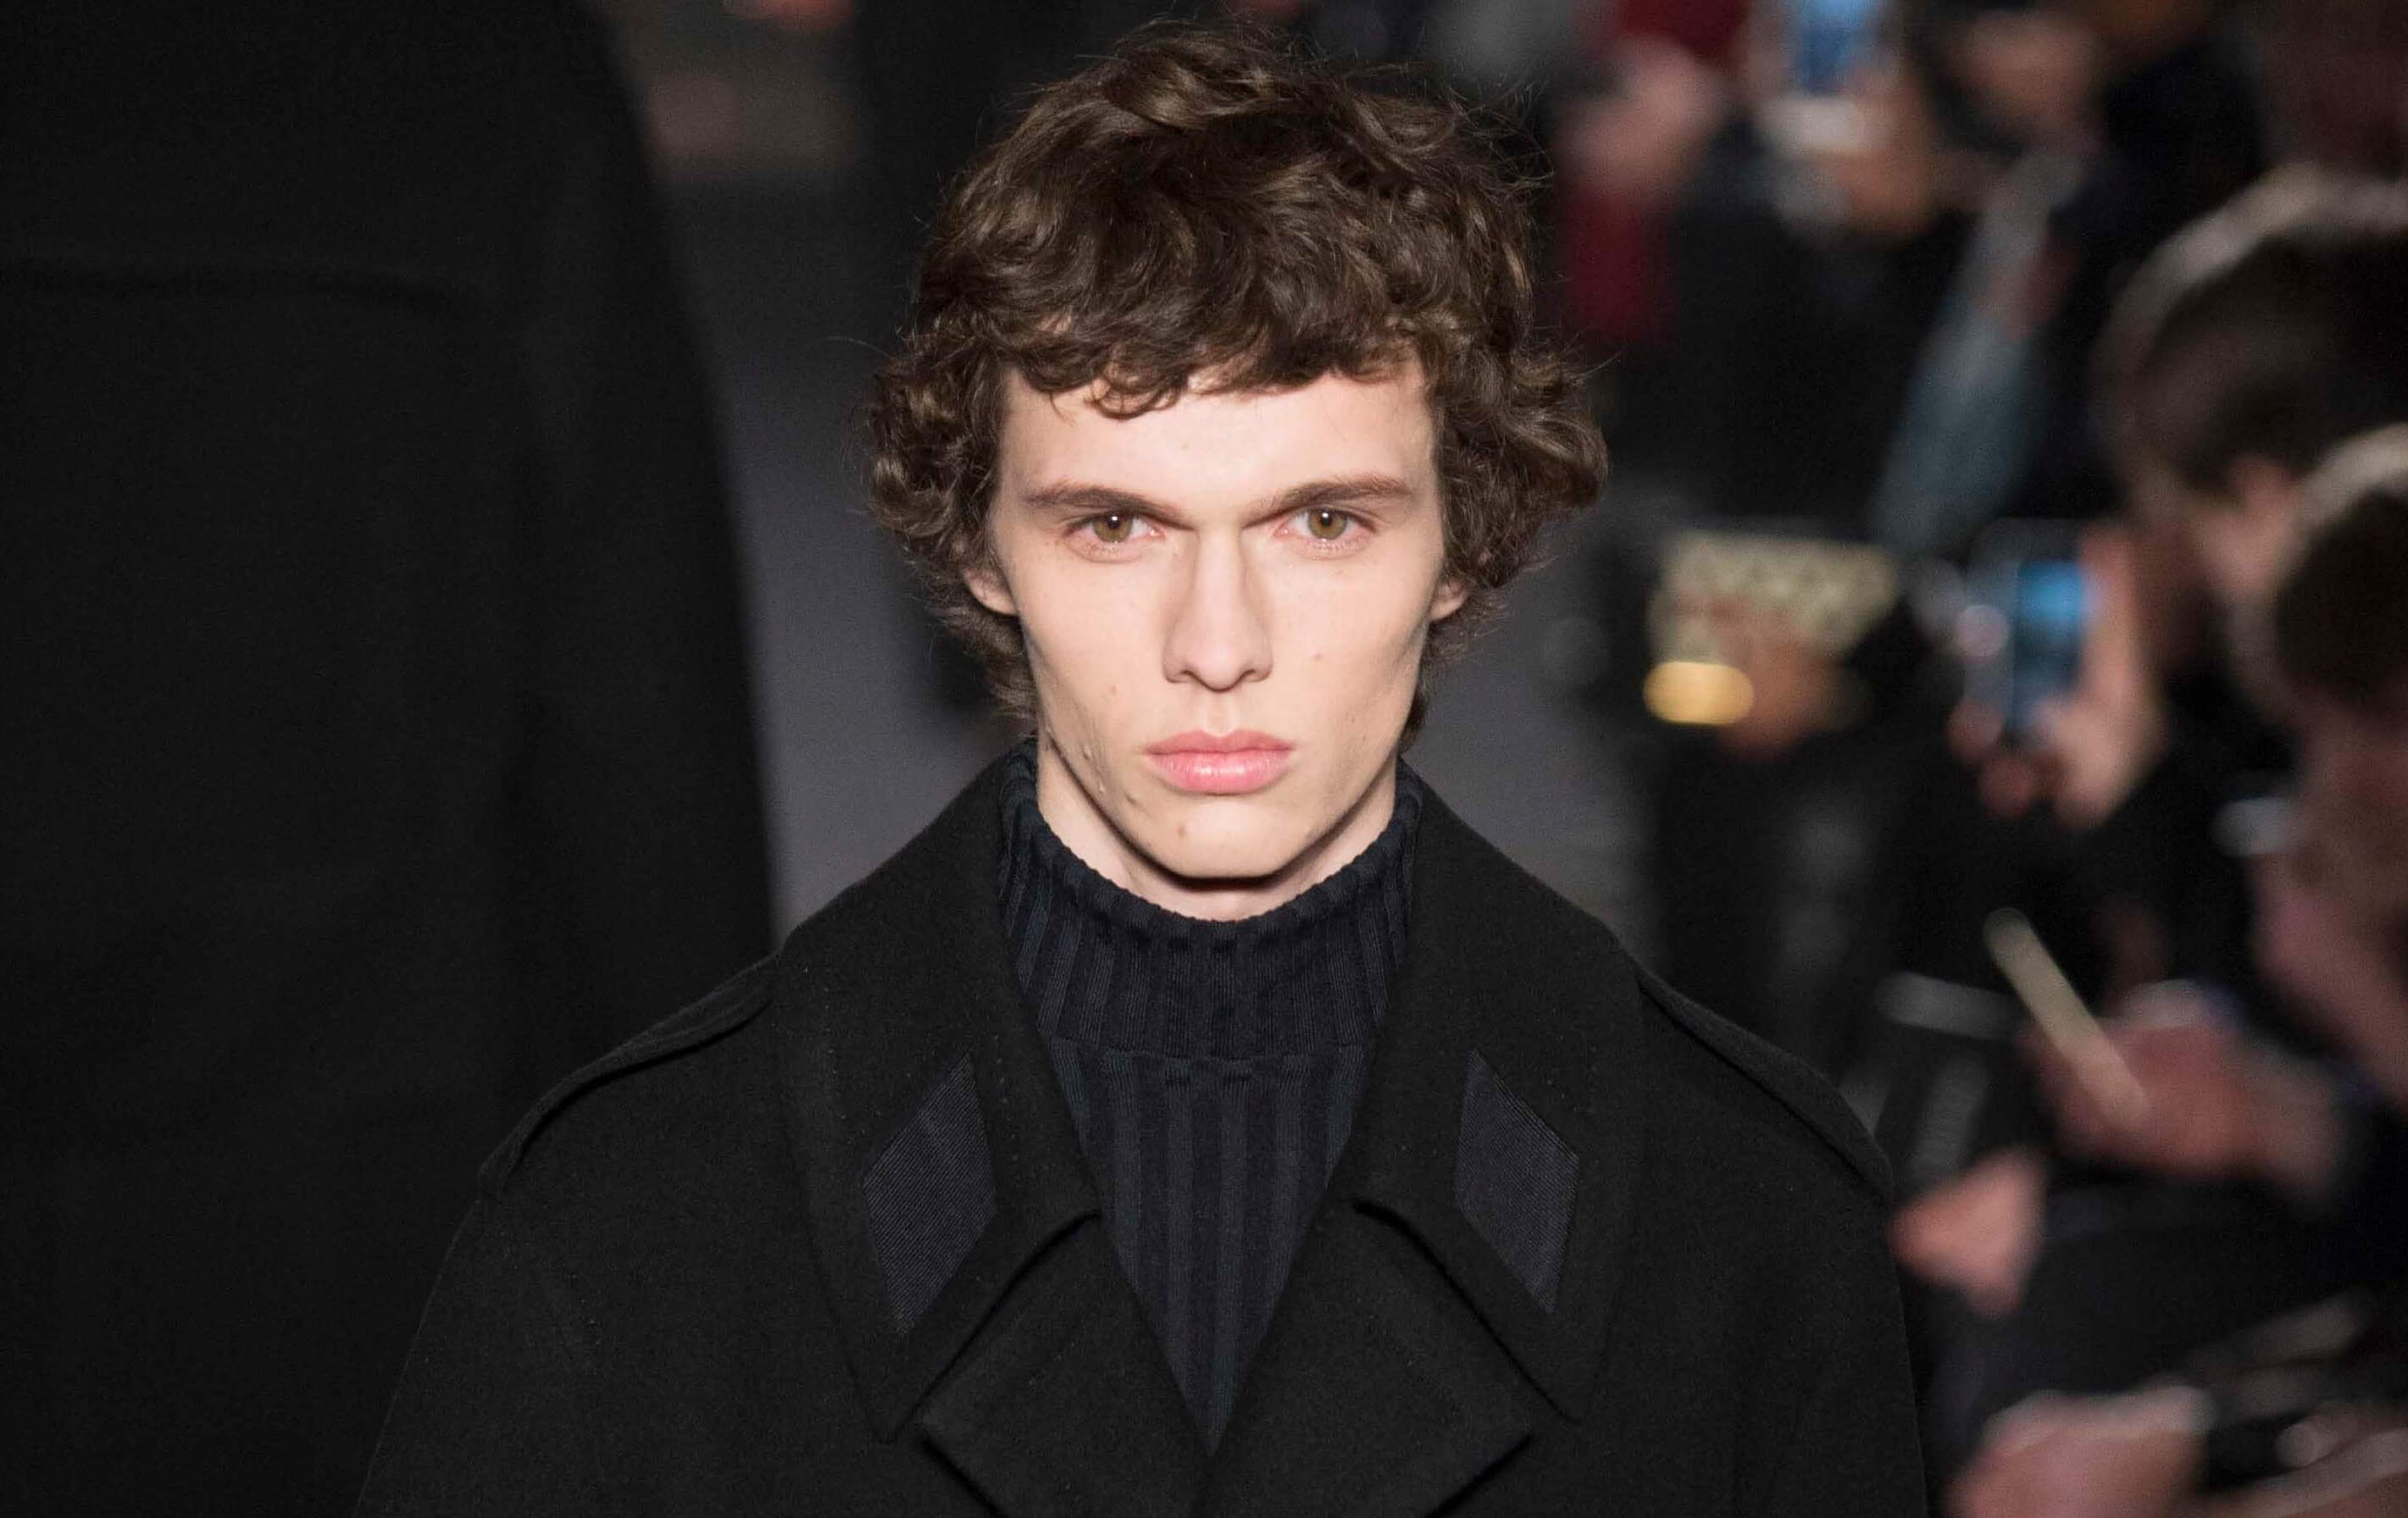 male model on the runway wearing a dark outfit with his dark brown hair worn short and in curls